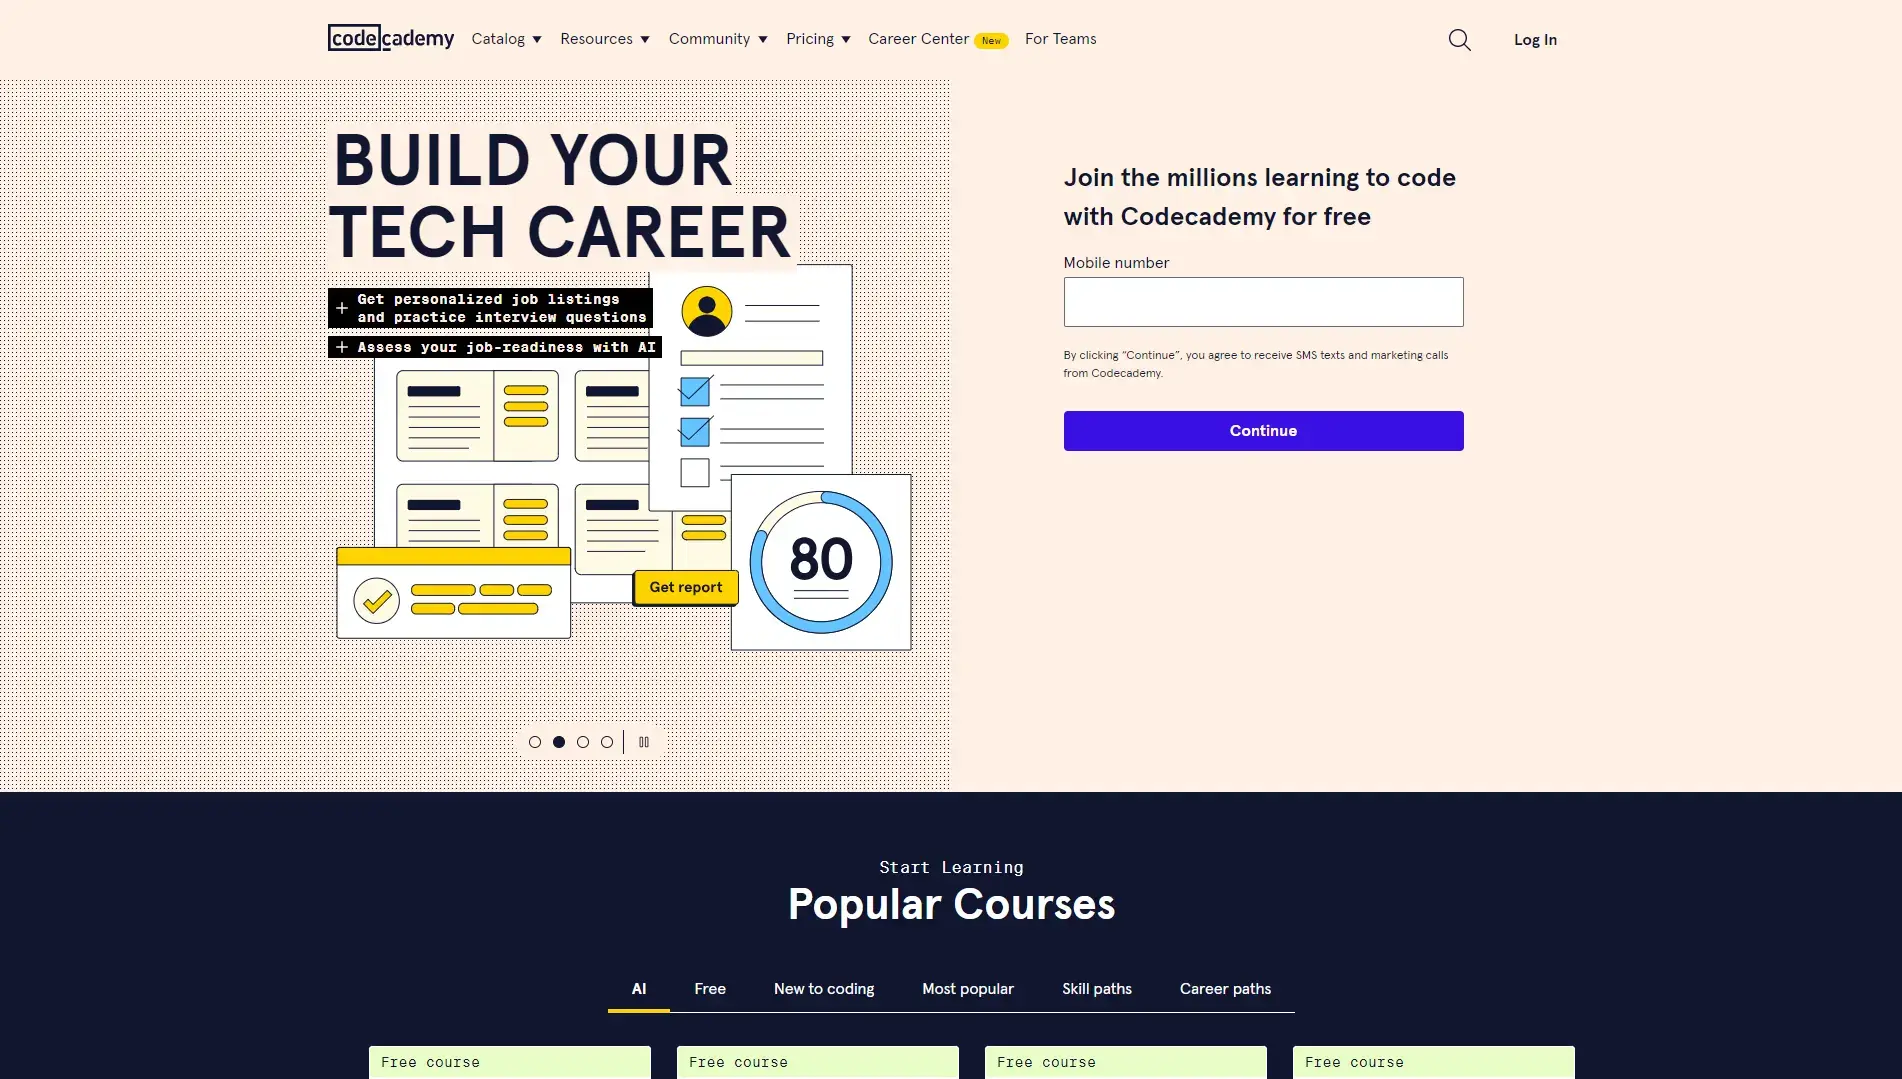 Image of Codecademy website's homepage.